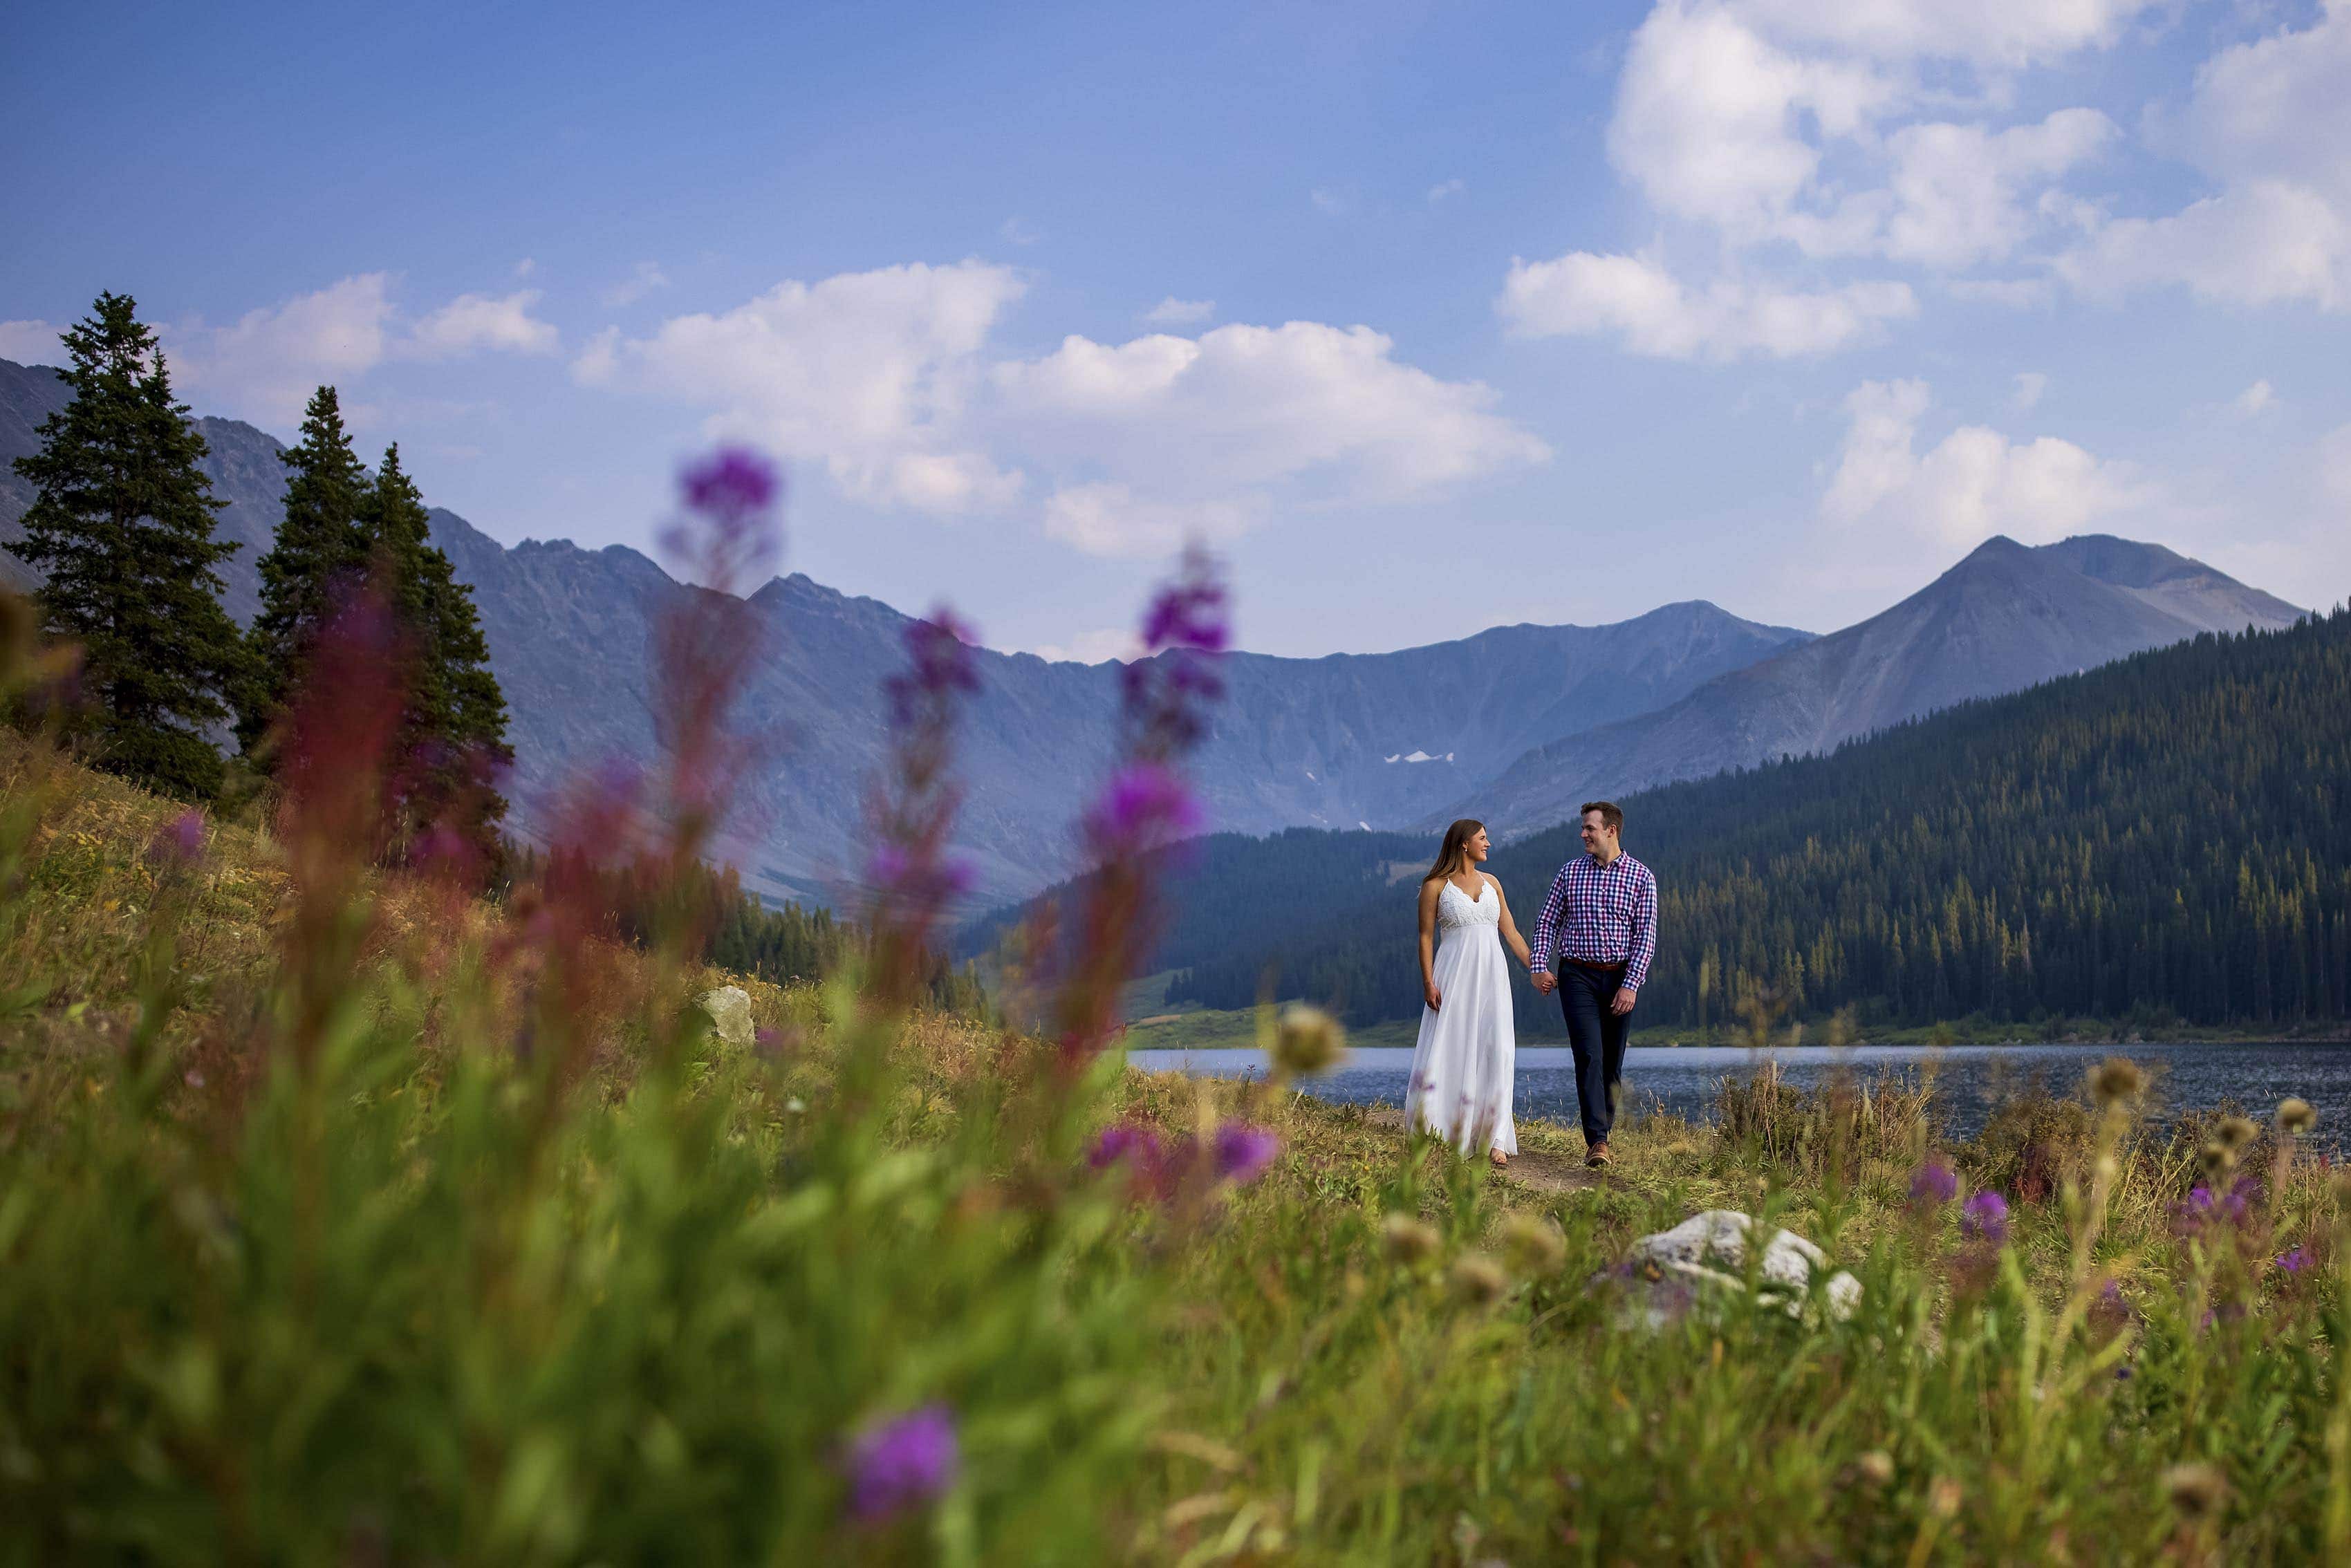 Wildflowers in bloom as a bride and groom walk together at Clinton Gulch Dam Reservoir